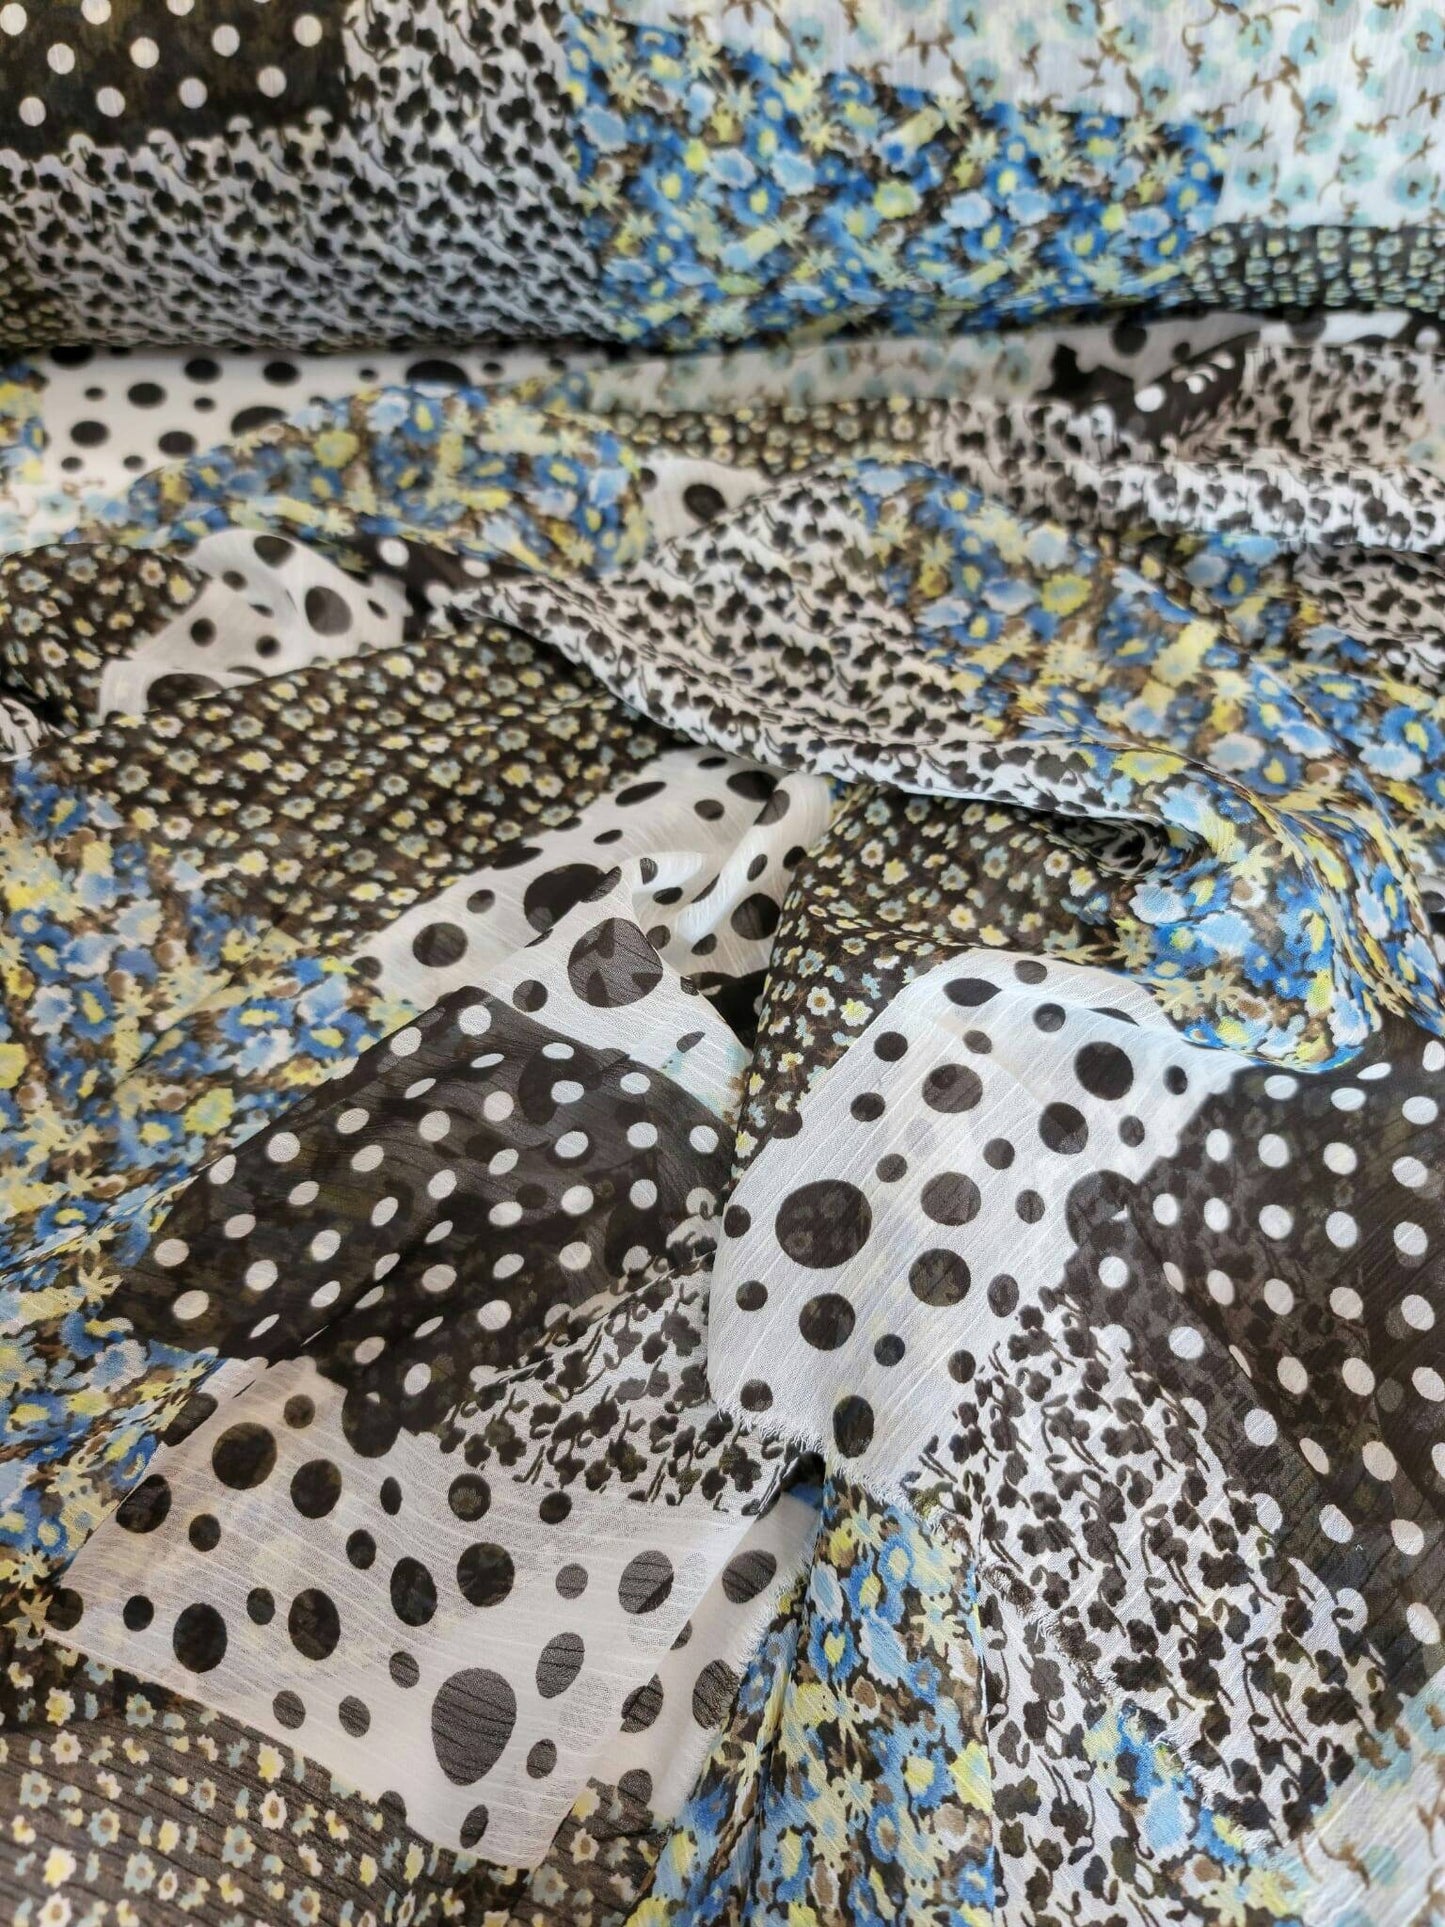 Chiffon Blue Black Floral Prom Fabric Sold by the Yard Squre Polka Dot Light Weight